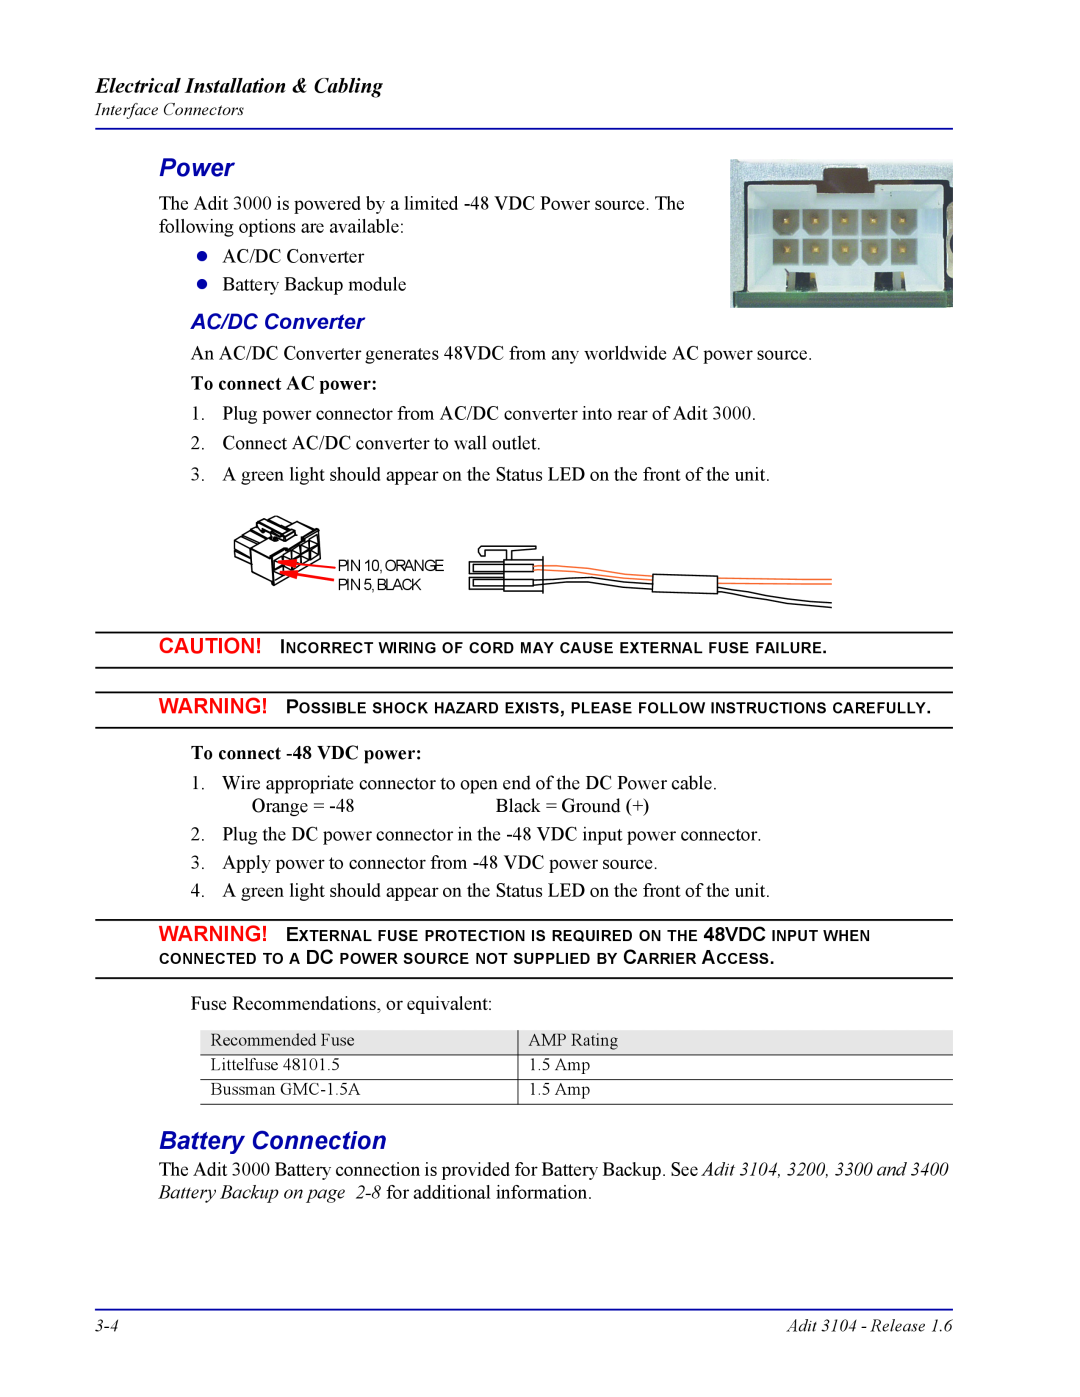 Carrier Access Adit 3104 user manual Battery Connection, AC/DC Converter, Power, Electrical Installation & Cabling 